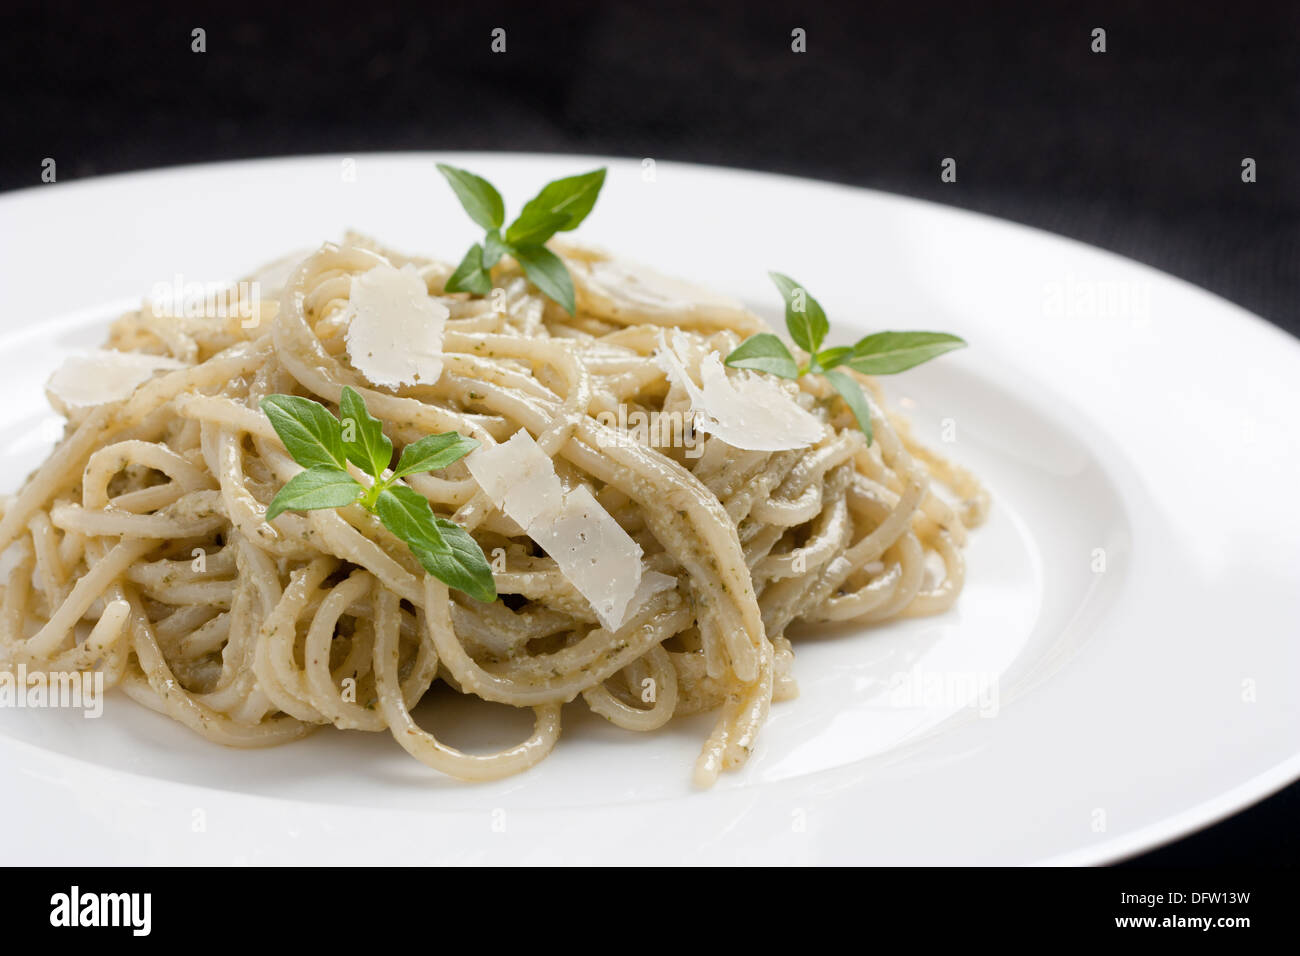 Spaghetti with cheese and basil Stock Photo